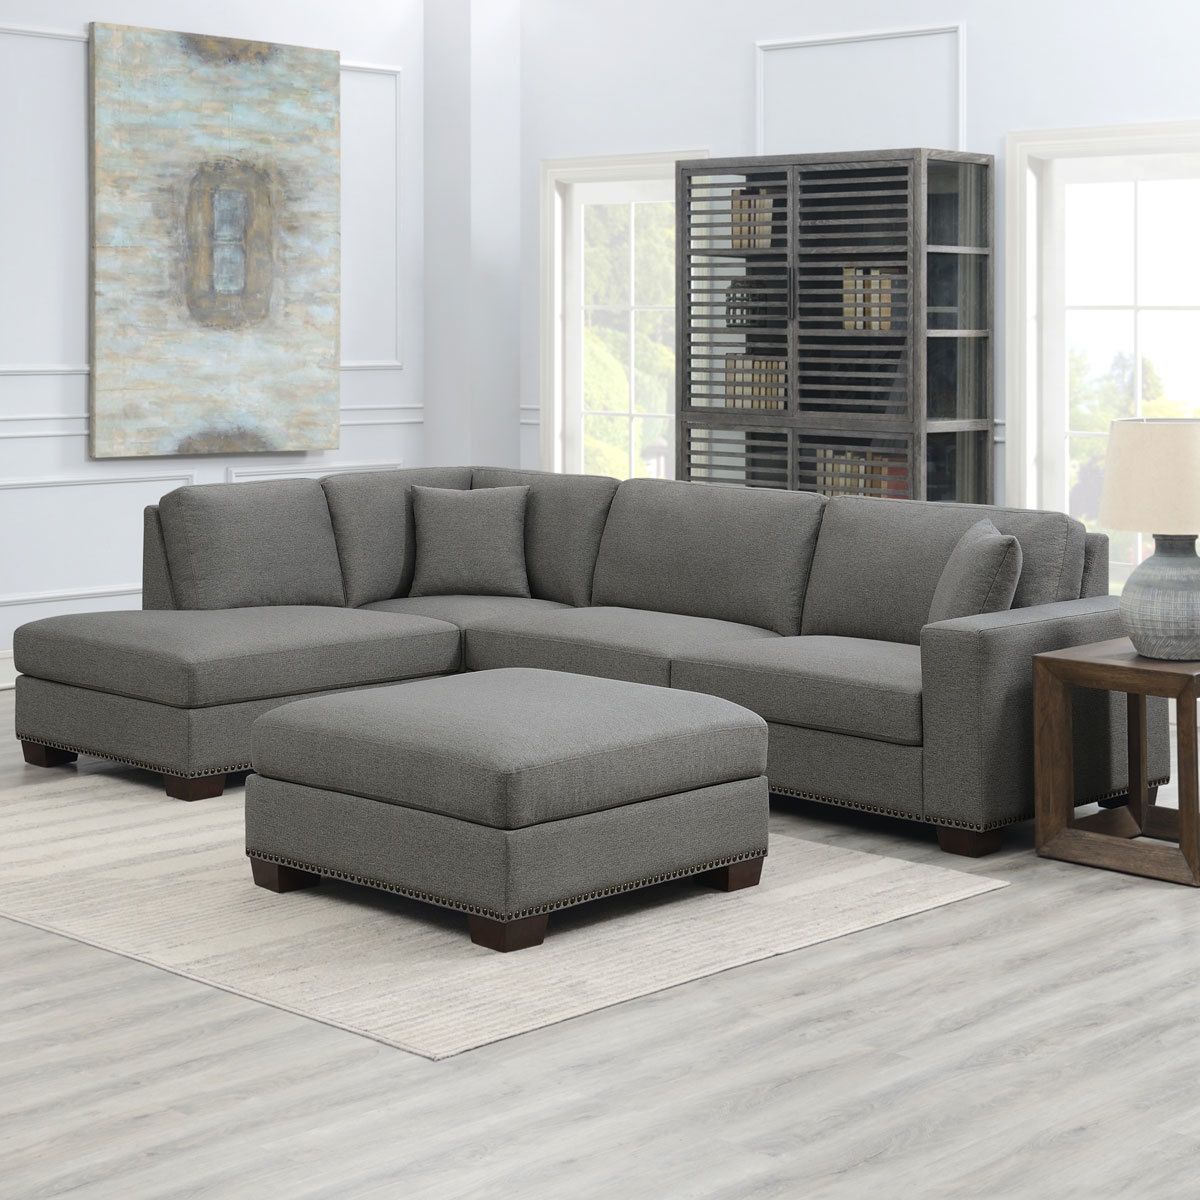 Thomasville Artesia Grey Fabric Sectional Sofa With Ottoman, Right Within Sofas With Ottomans (Gallery 10 of 20)